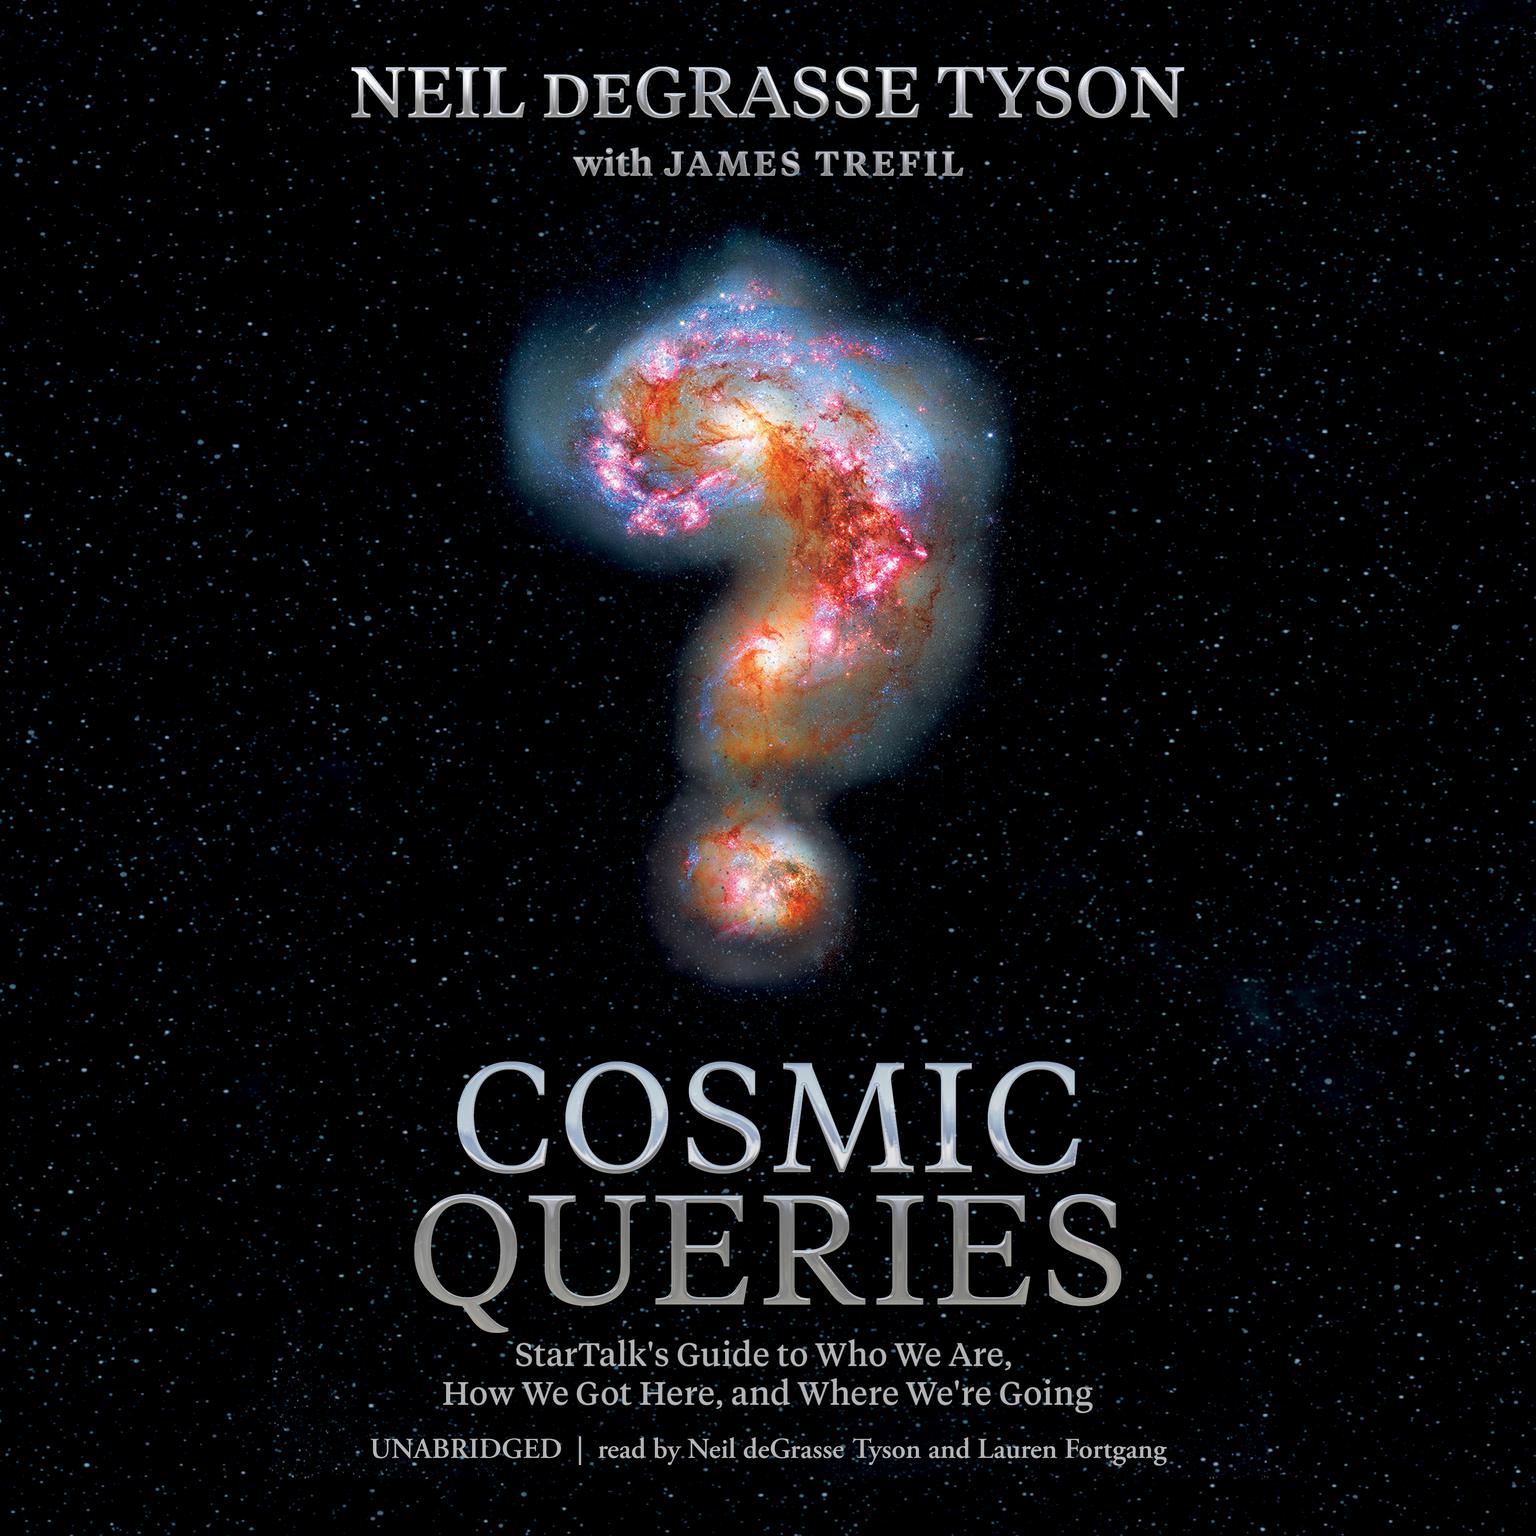 Cosmic Queries: StarTalk’s Guide to Who We Are, How We Got Here, and Where We’re Going Audiobook, by Neil deGrasse Tyson